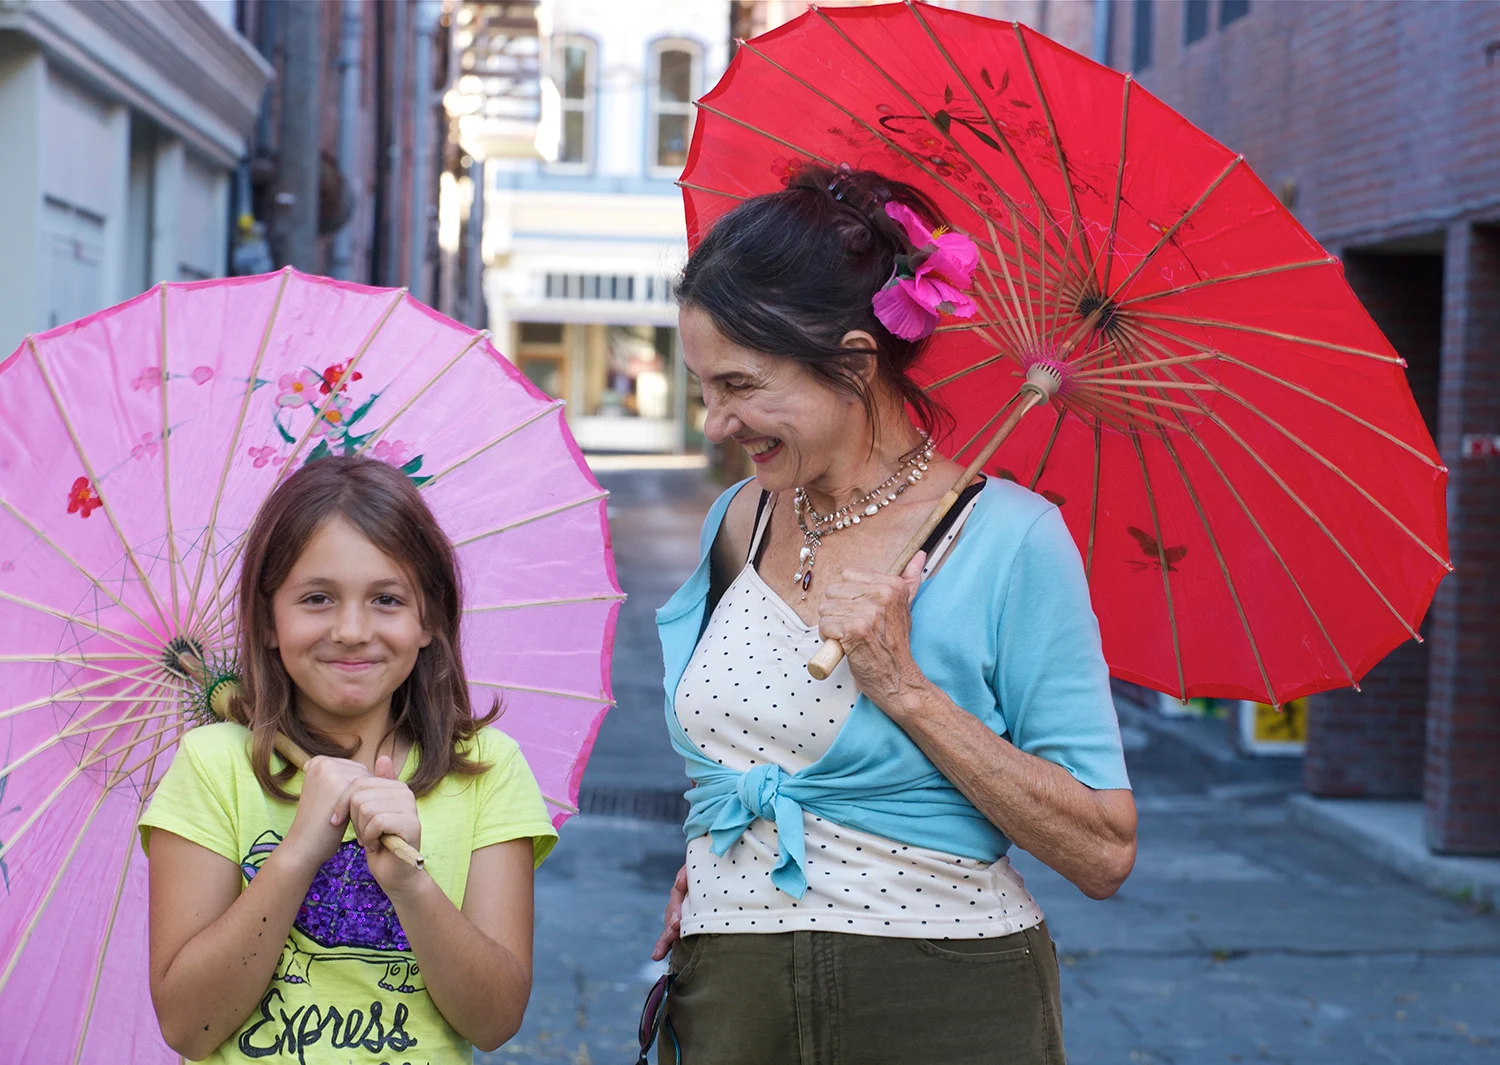 A woman and young girl have colorful parasols during the daytime.